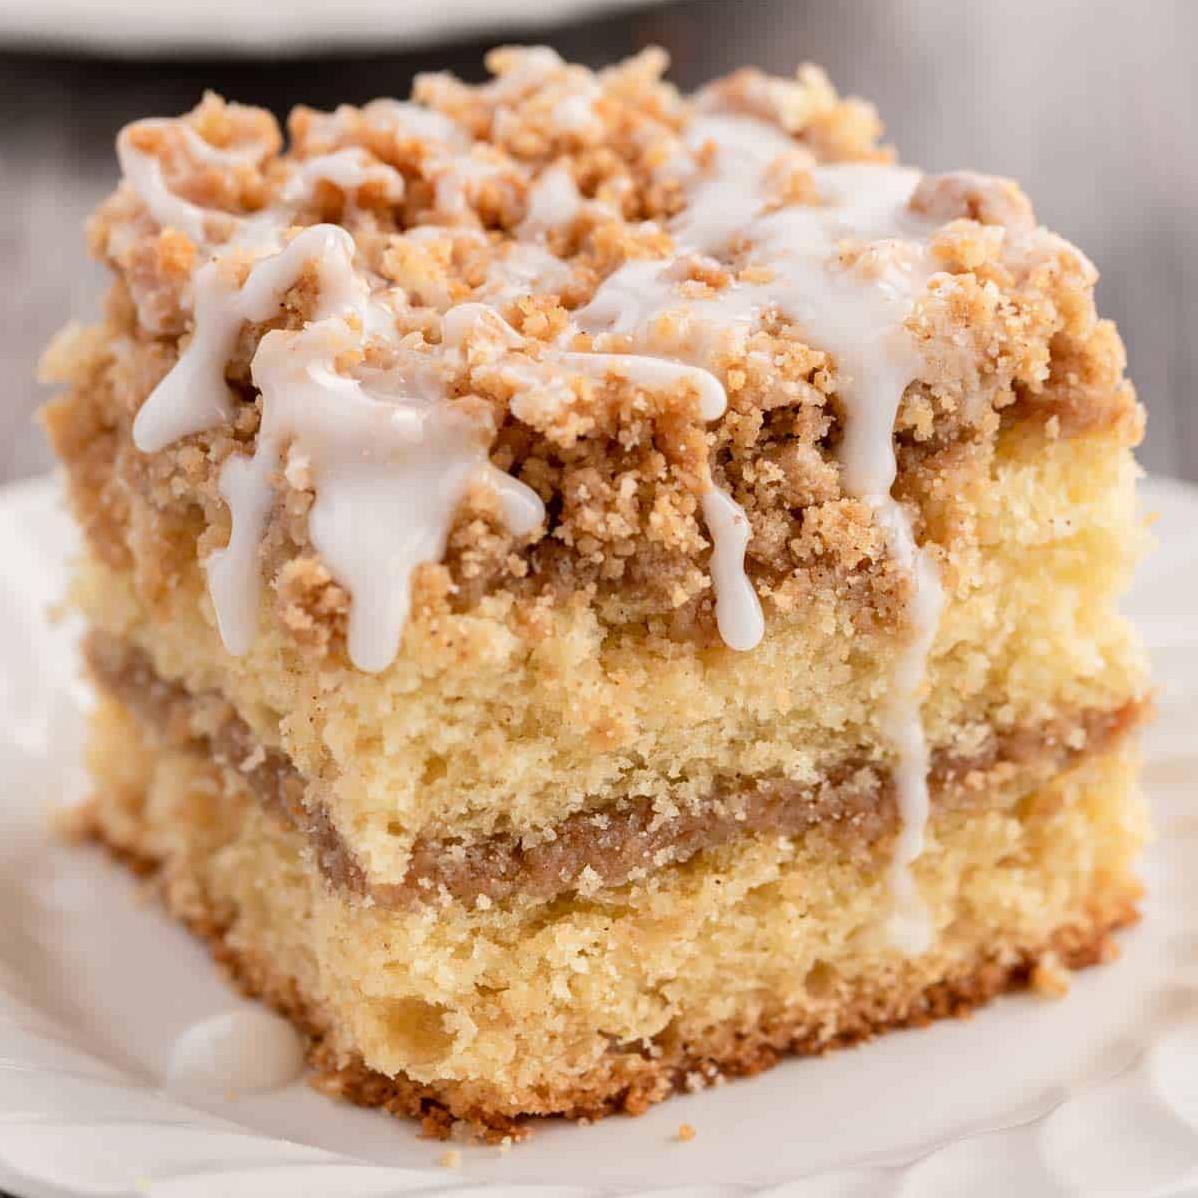  This coffee cake is the perfect companion for your coffee